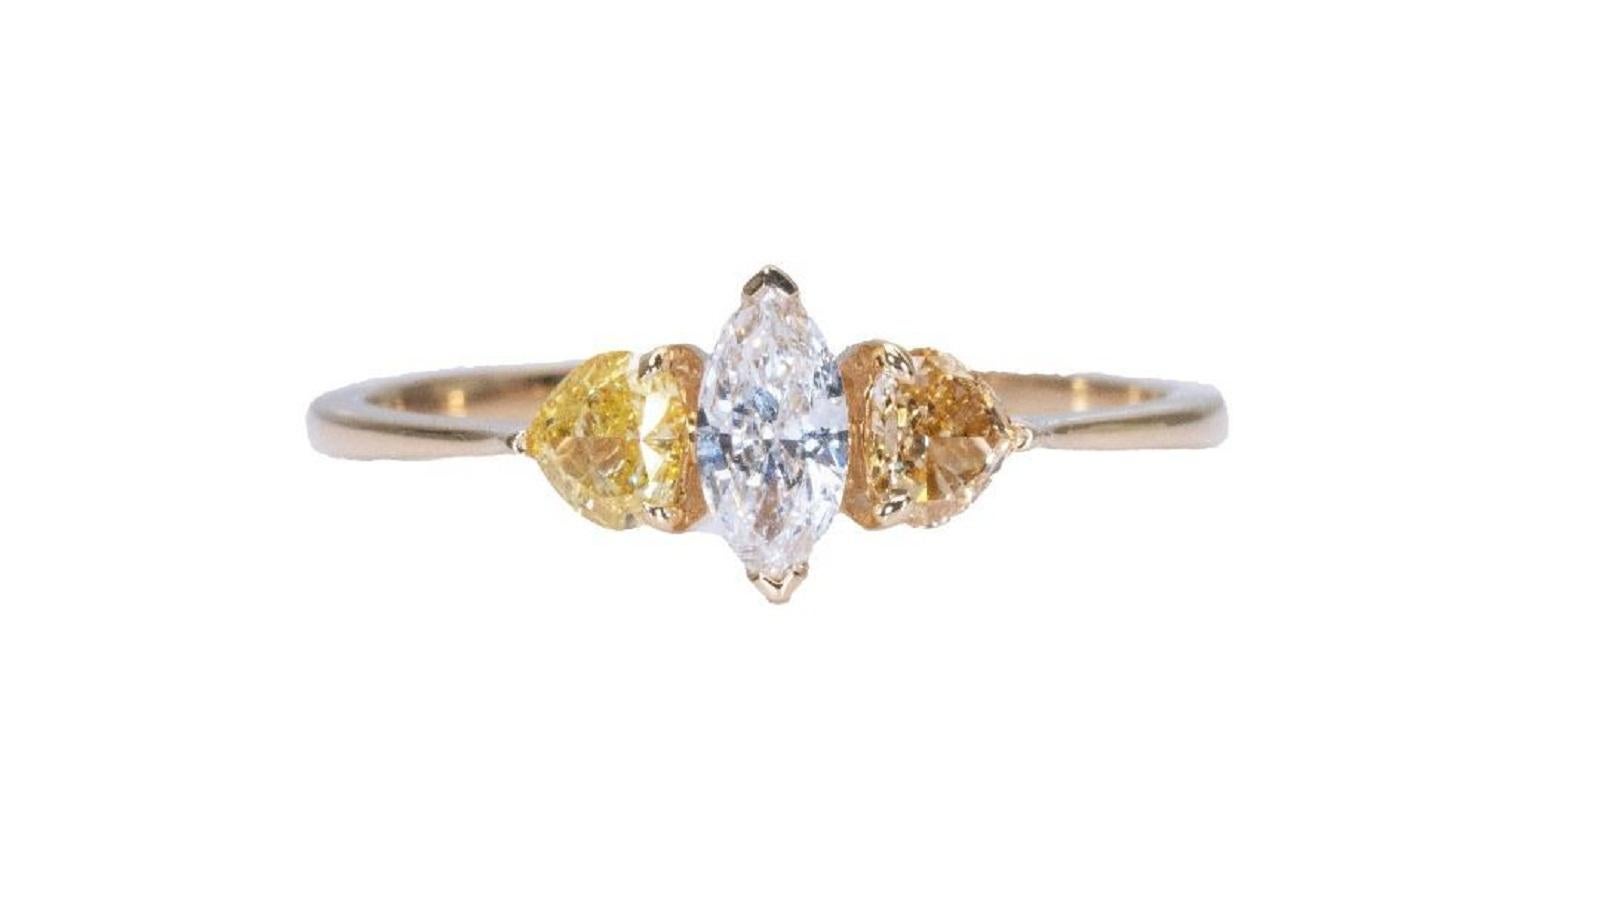 Beautiful 3 stone ring made from 18k yellow gold with 0.54 total carat of marquise cut diamond and fancy heart shape side diamonds. This ring comes with an AIG report and a fancy box.

1 diamond main stone of 0.20 ct.
cut: marquise
color: D
clarity: